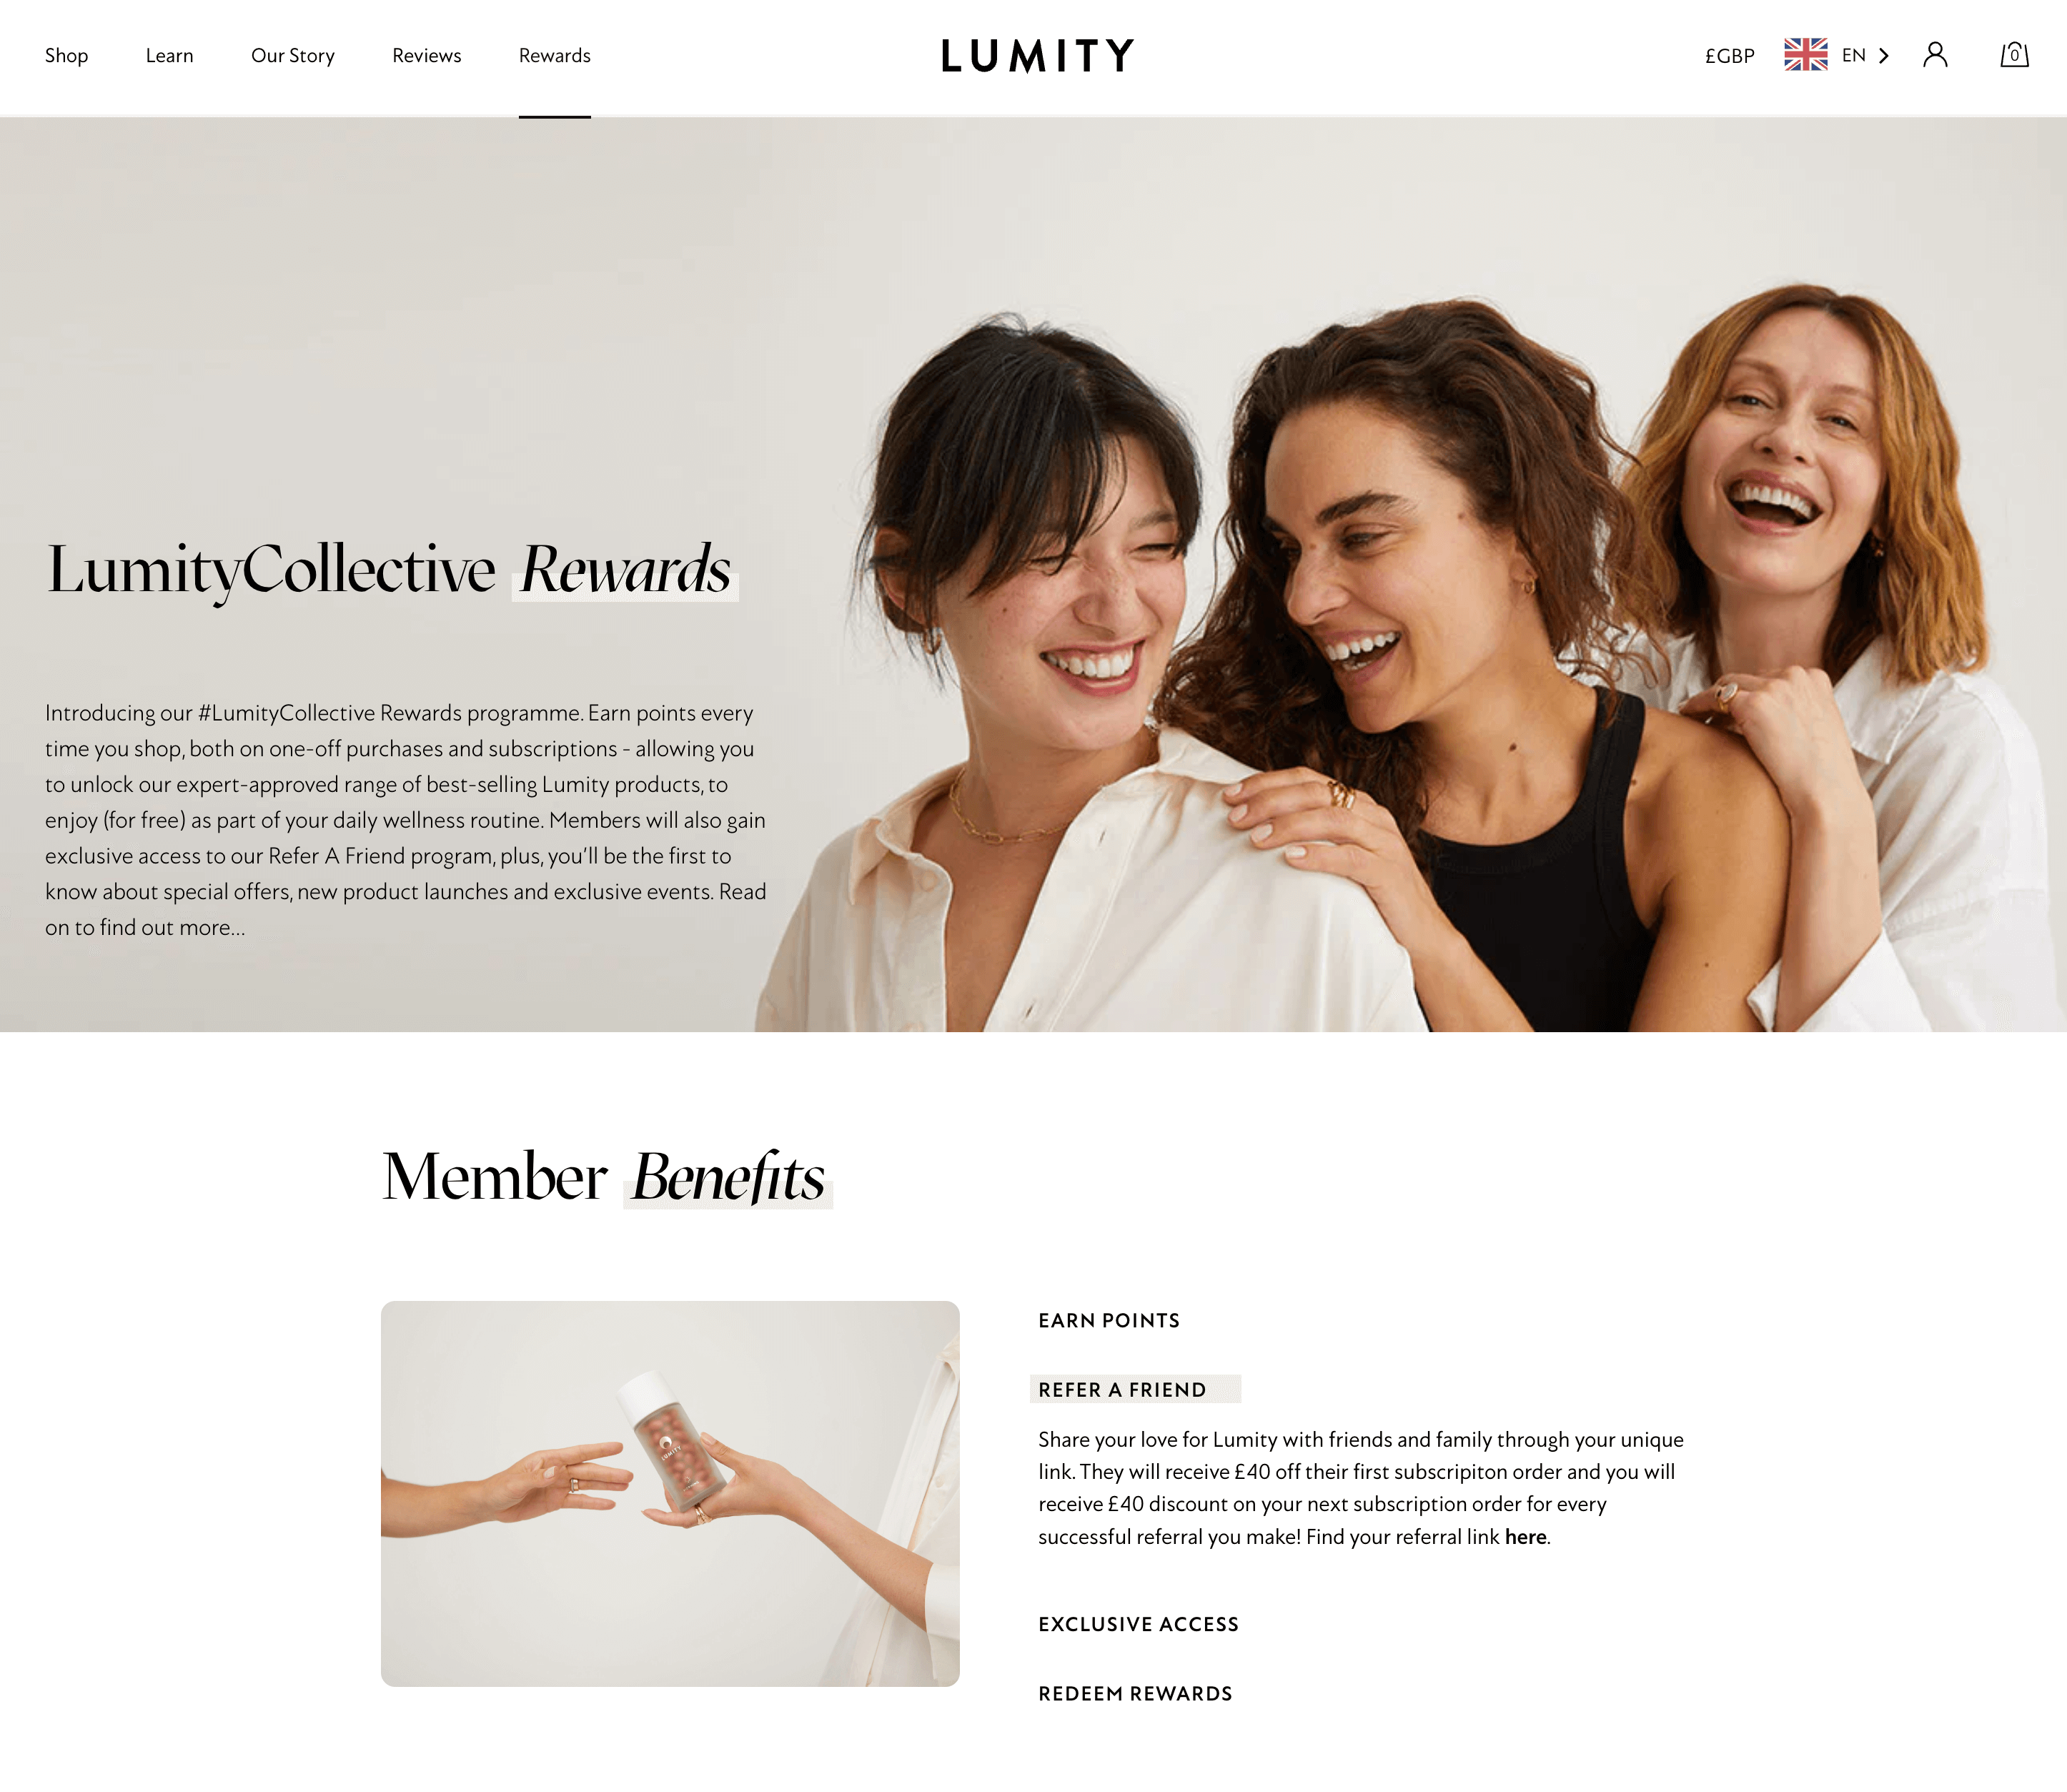 A screenshot of Lumity’s LumityCollective Rewards program explainer page, showing the referral program details offering £40 for each party.